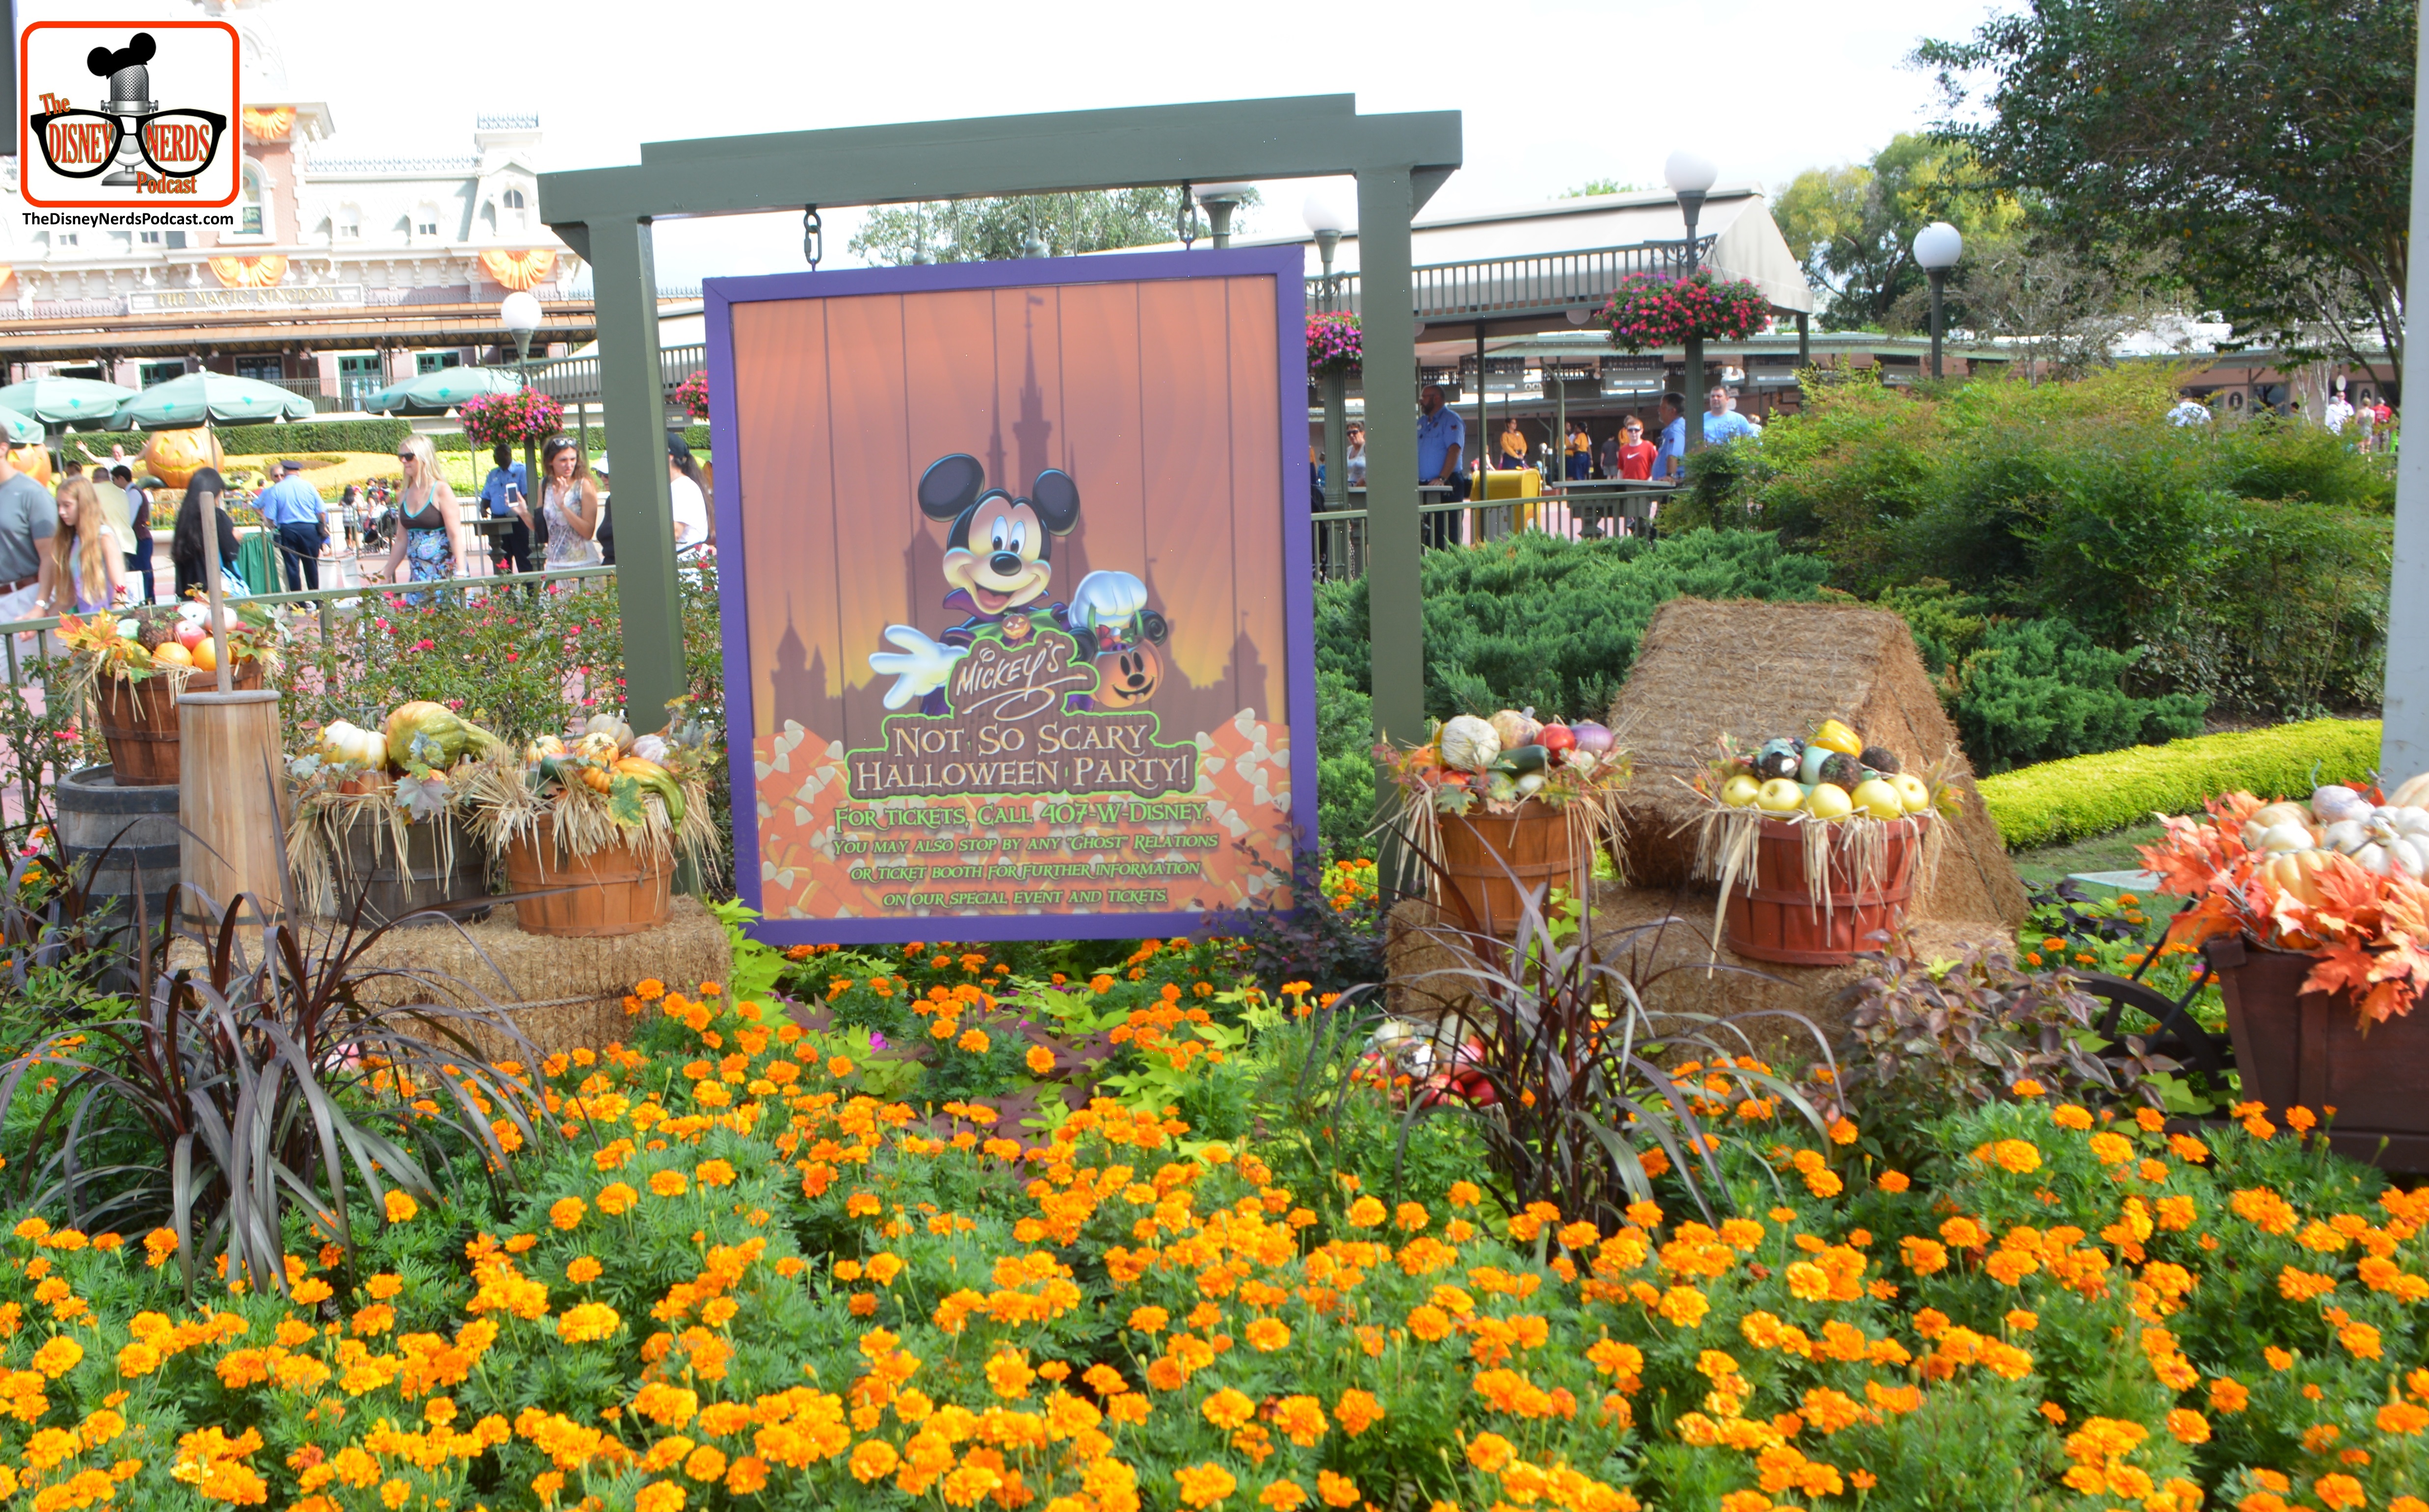 Fall is in the air at magic Kingdom